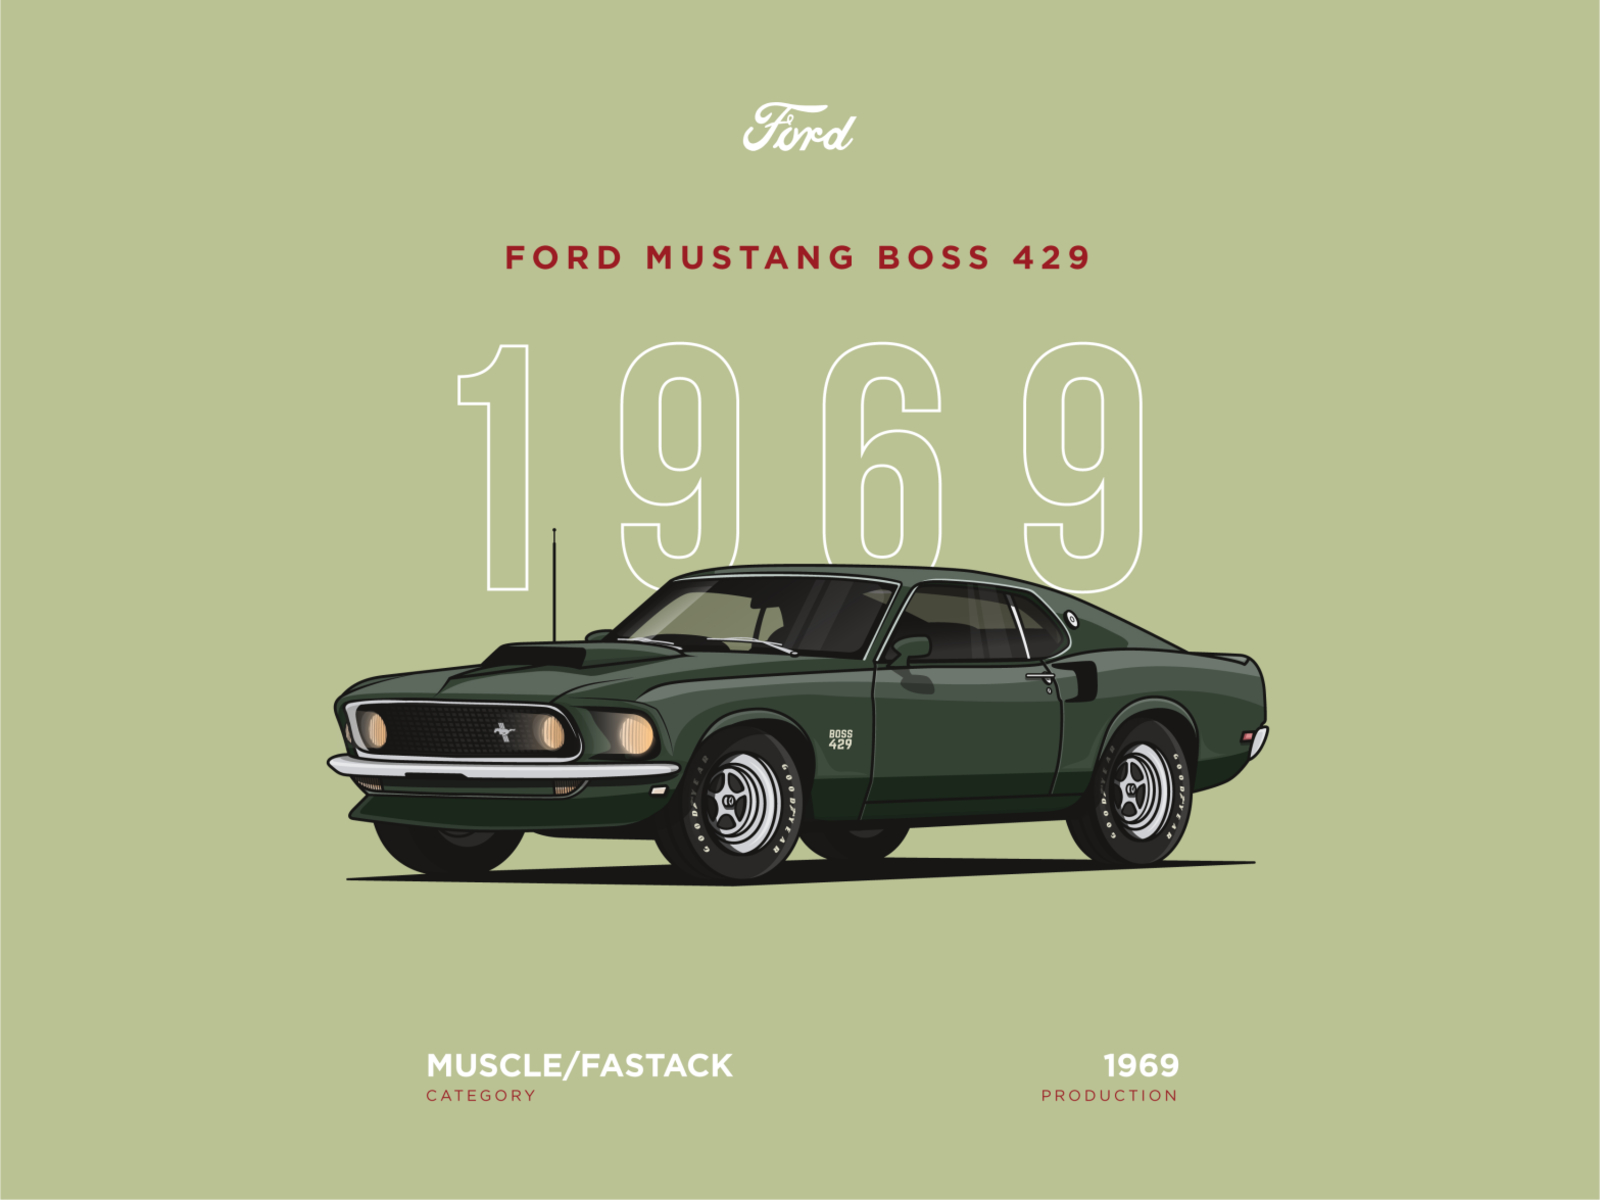 FORD MUSTANG 1969 ILLUSTRATION by kostrzewadesign.com on Dribbble